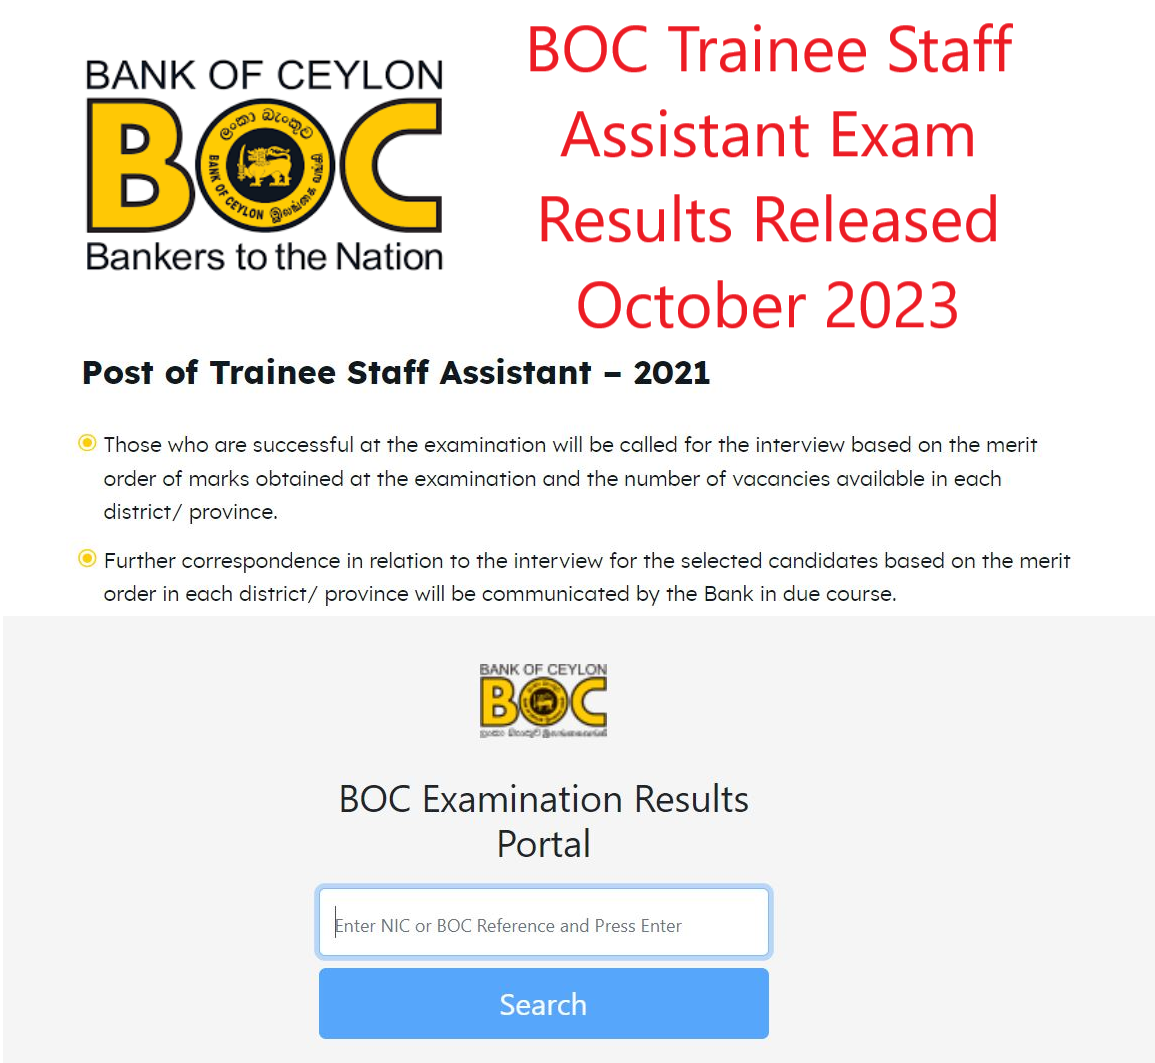 BOC Trainee Staff Assistant Exam Results 2021